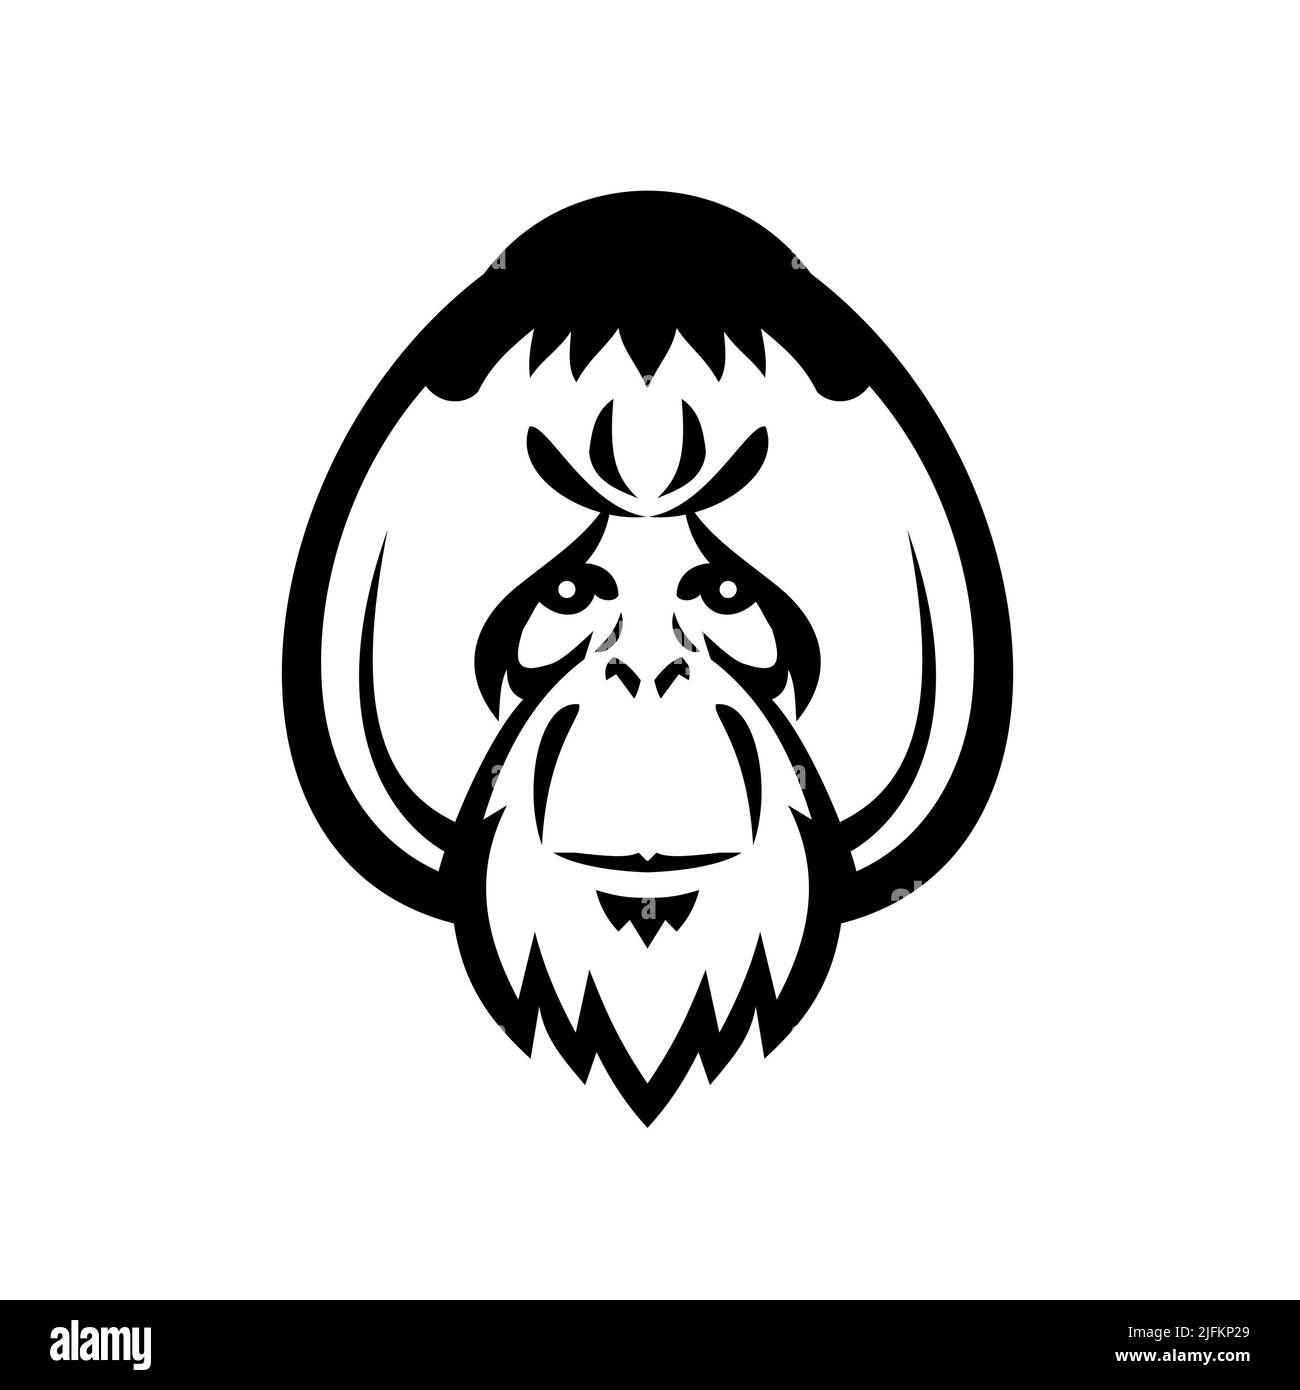 Mascot Illustration of head of an adult male orangutan, a great ape native to rainforests of Indonesia and Malaysia with distinctive cheek pads or Stock Photo